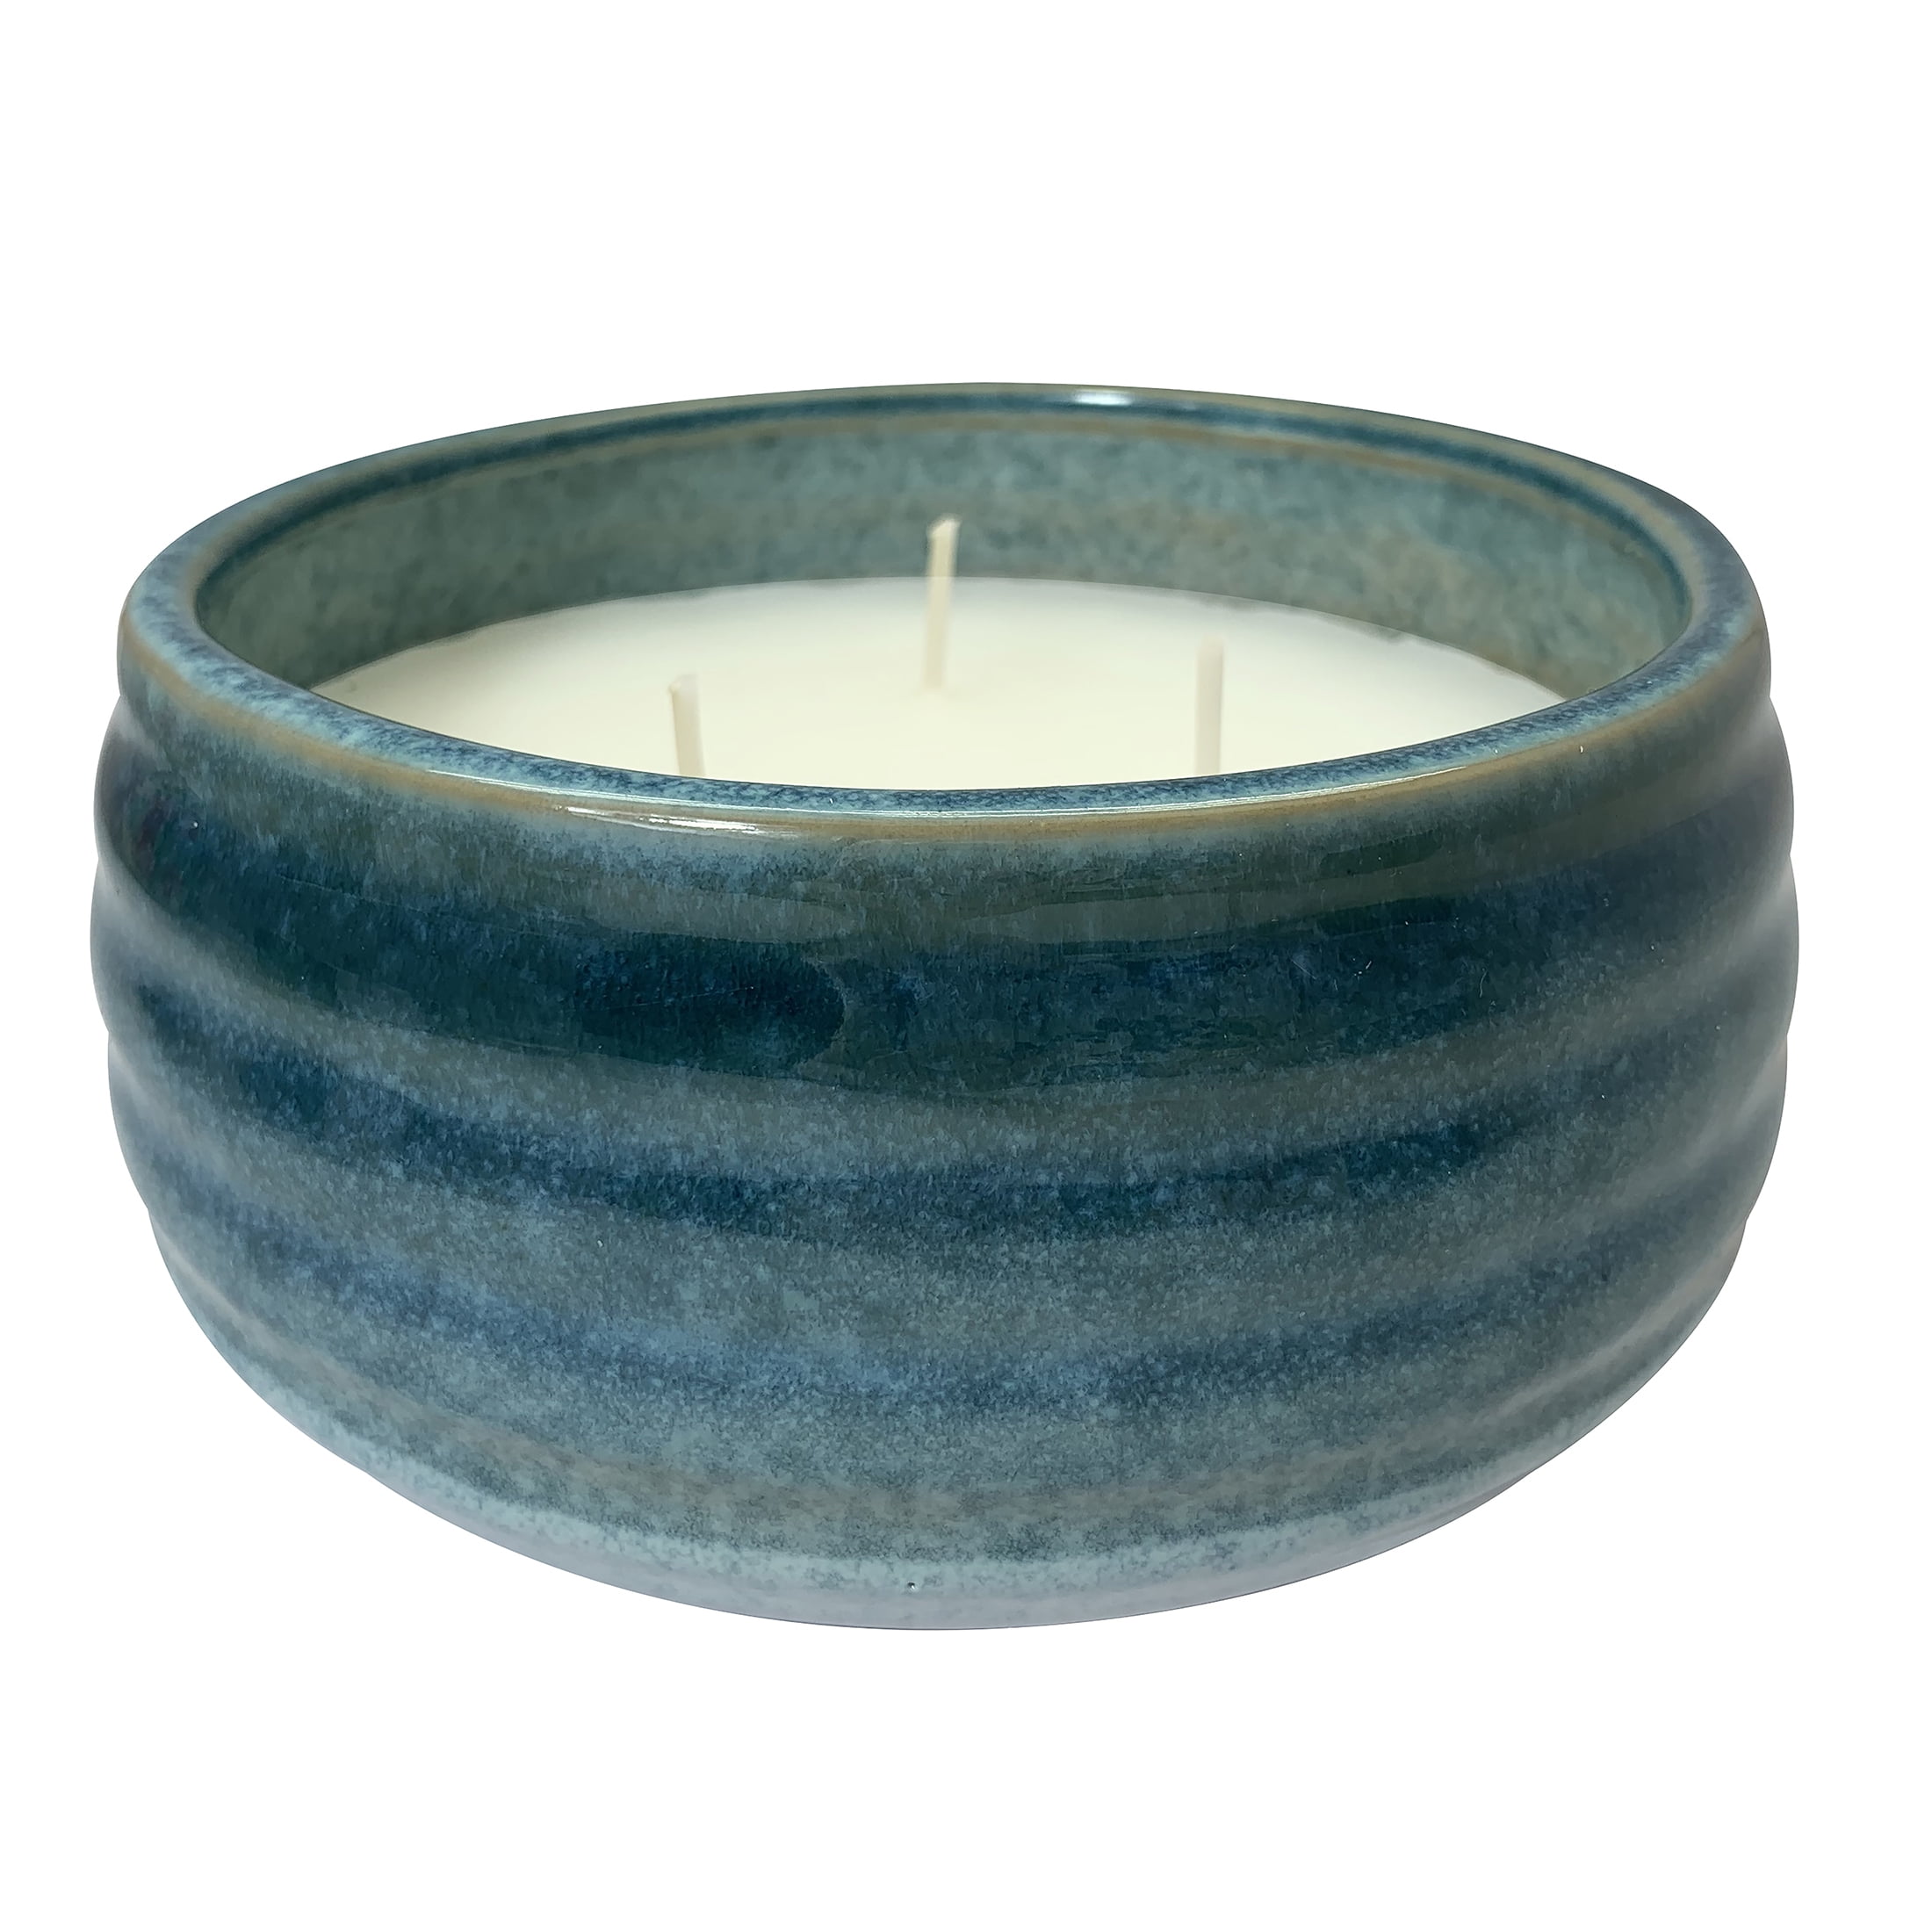 Better Homes & Gardens Outside Citronella 6' Ceramic 3-Wick Candle, Teal